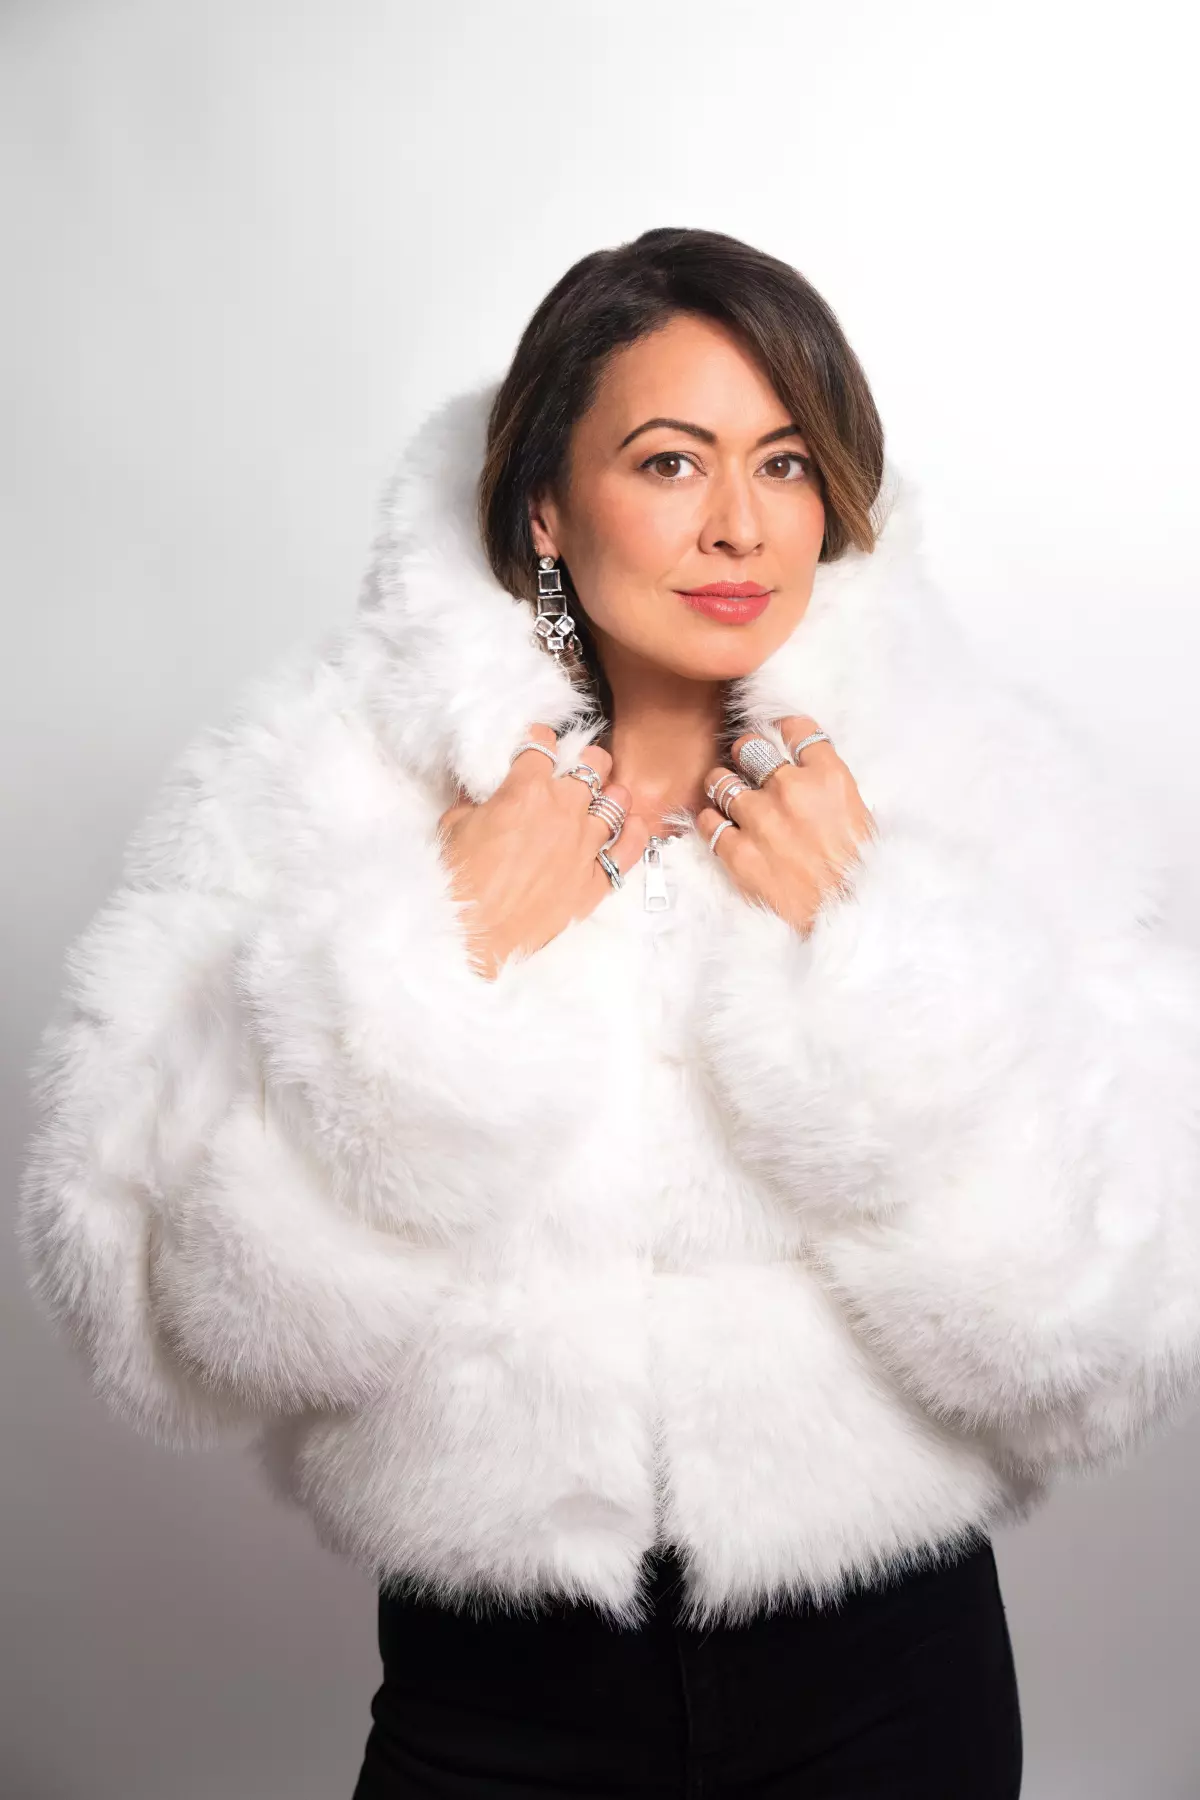 Jewelry designer and owner of Camille Jewelry, Camille Codorniu models her own pieces for (201) Magazine